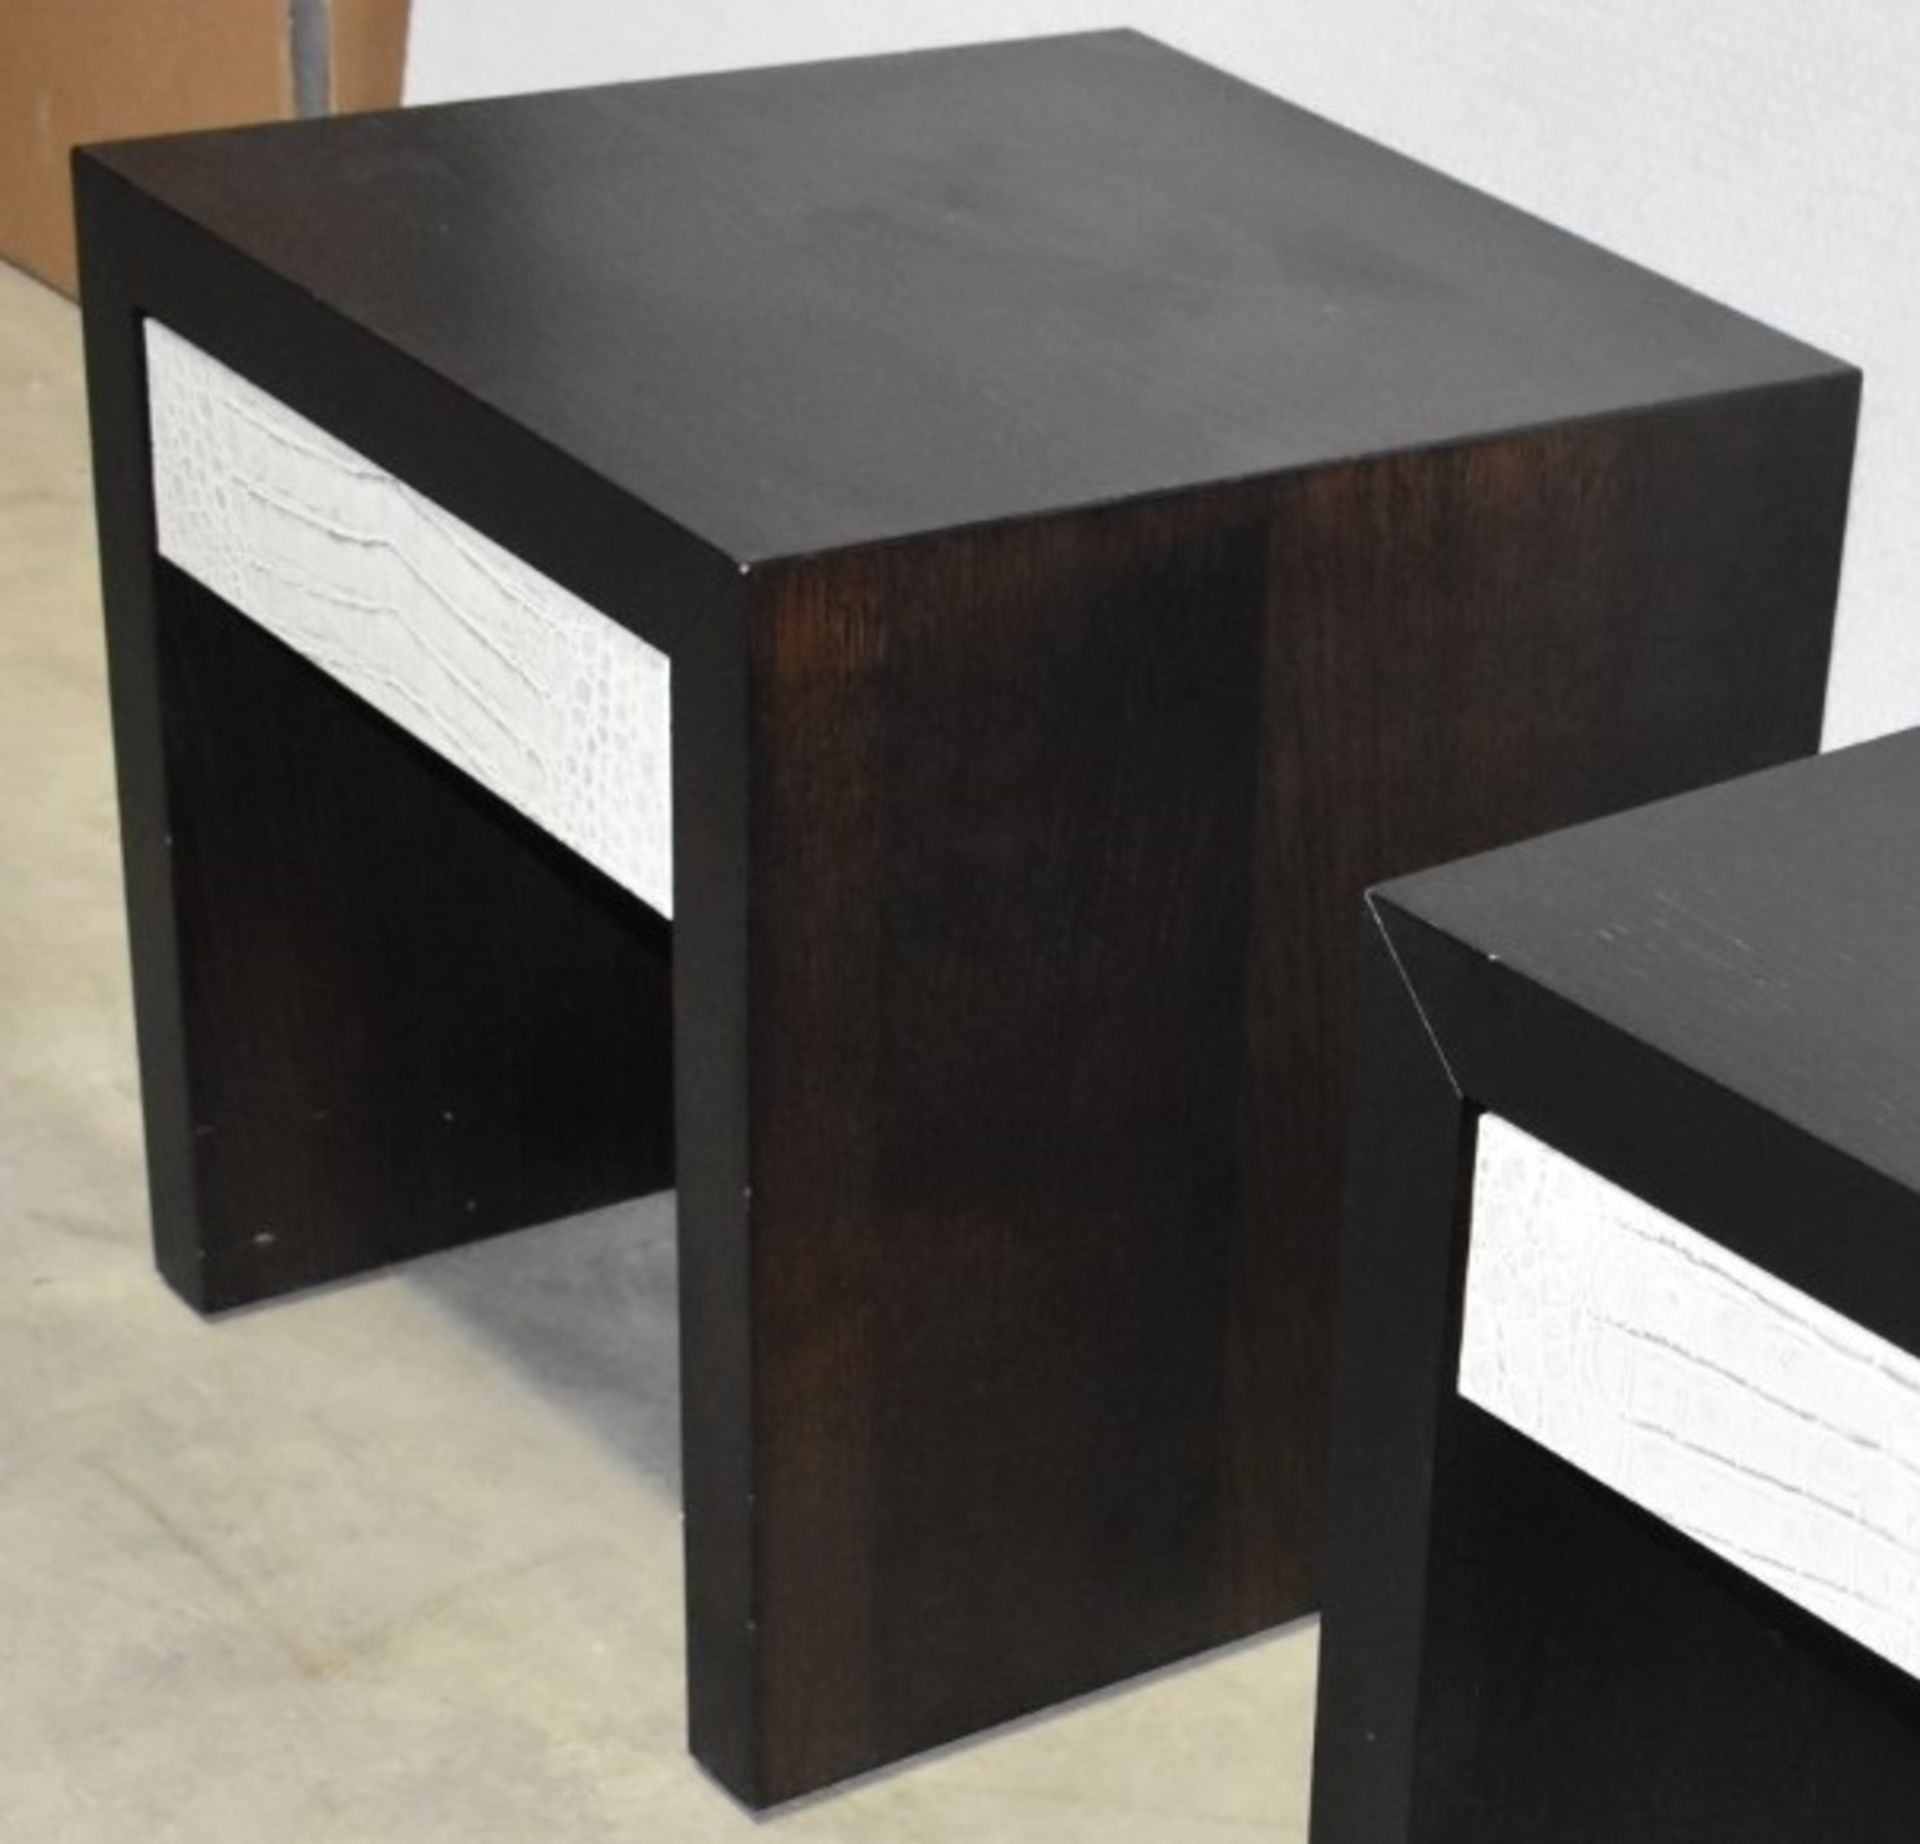 Pair of FENDI Modern Designer Wooden Bedside Cabinets Featuring Suede-style Lined 1-Drawer Storage - Image 8 of 15